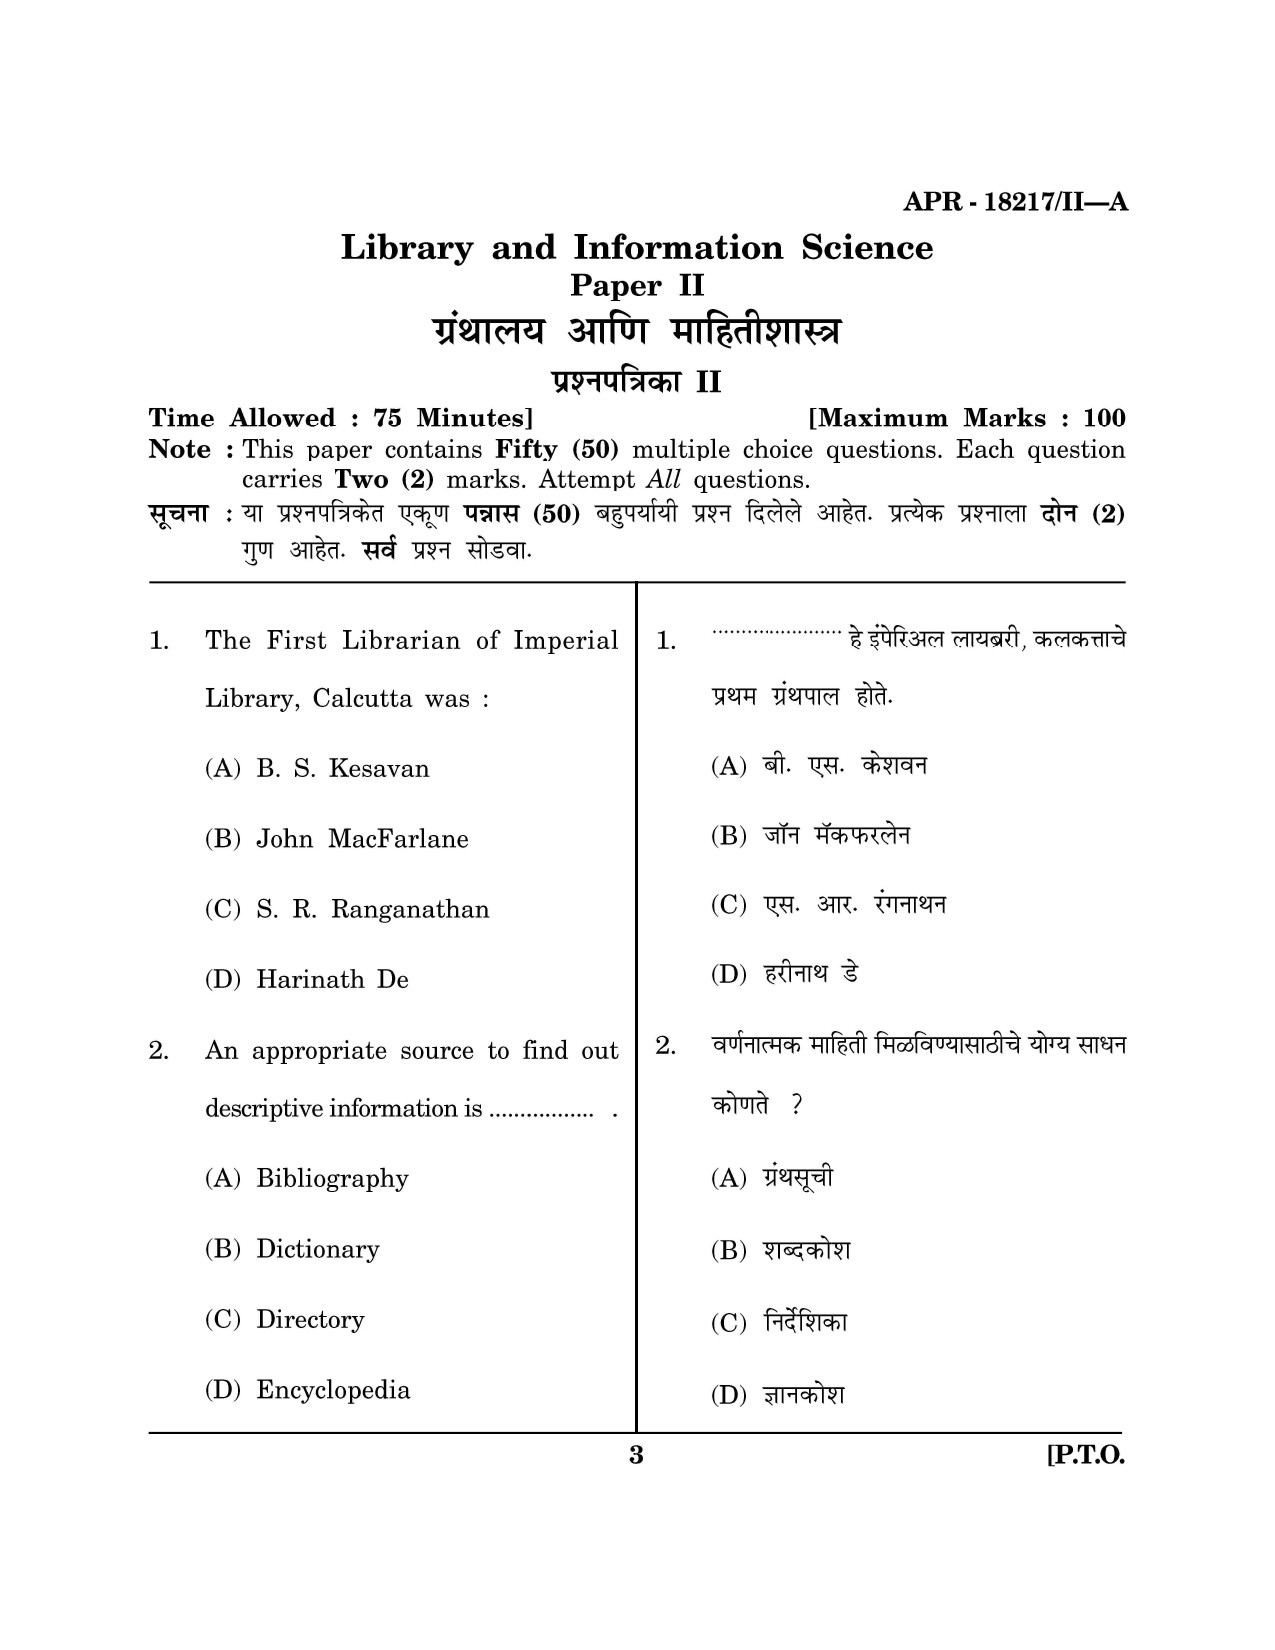 Maharashtra SET Library Information Science Question Paper II April 2017 2